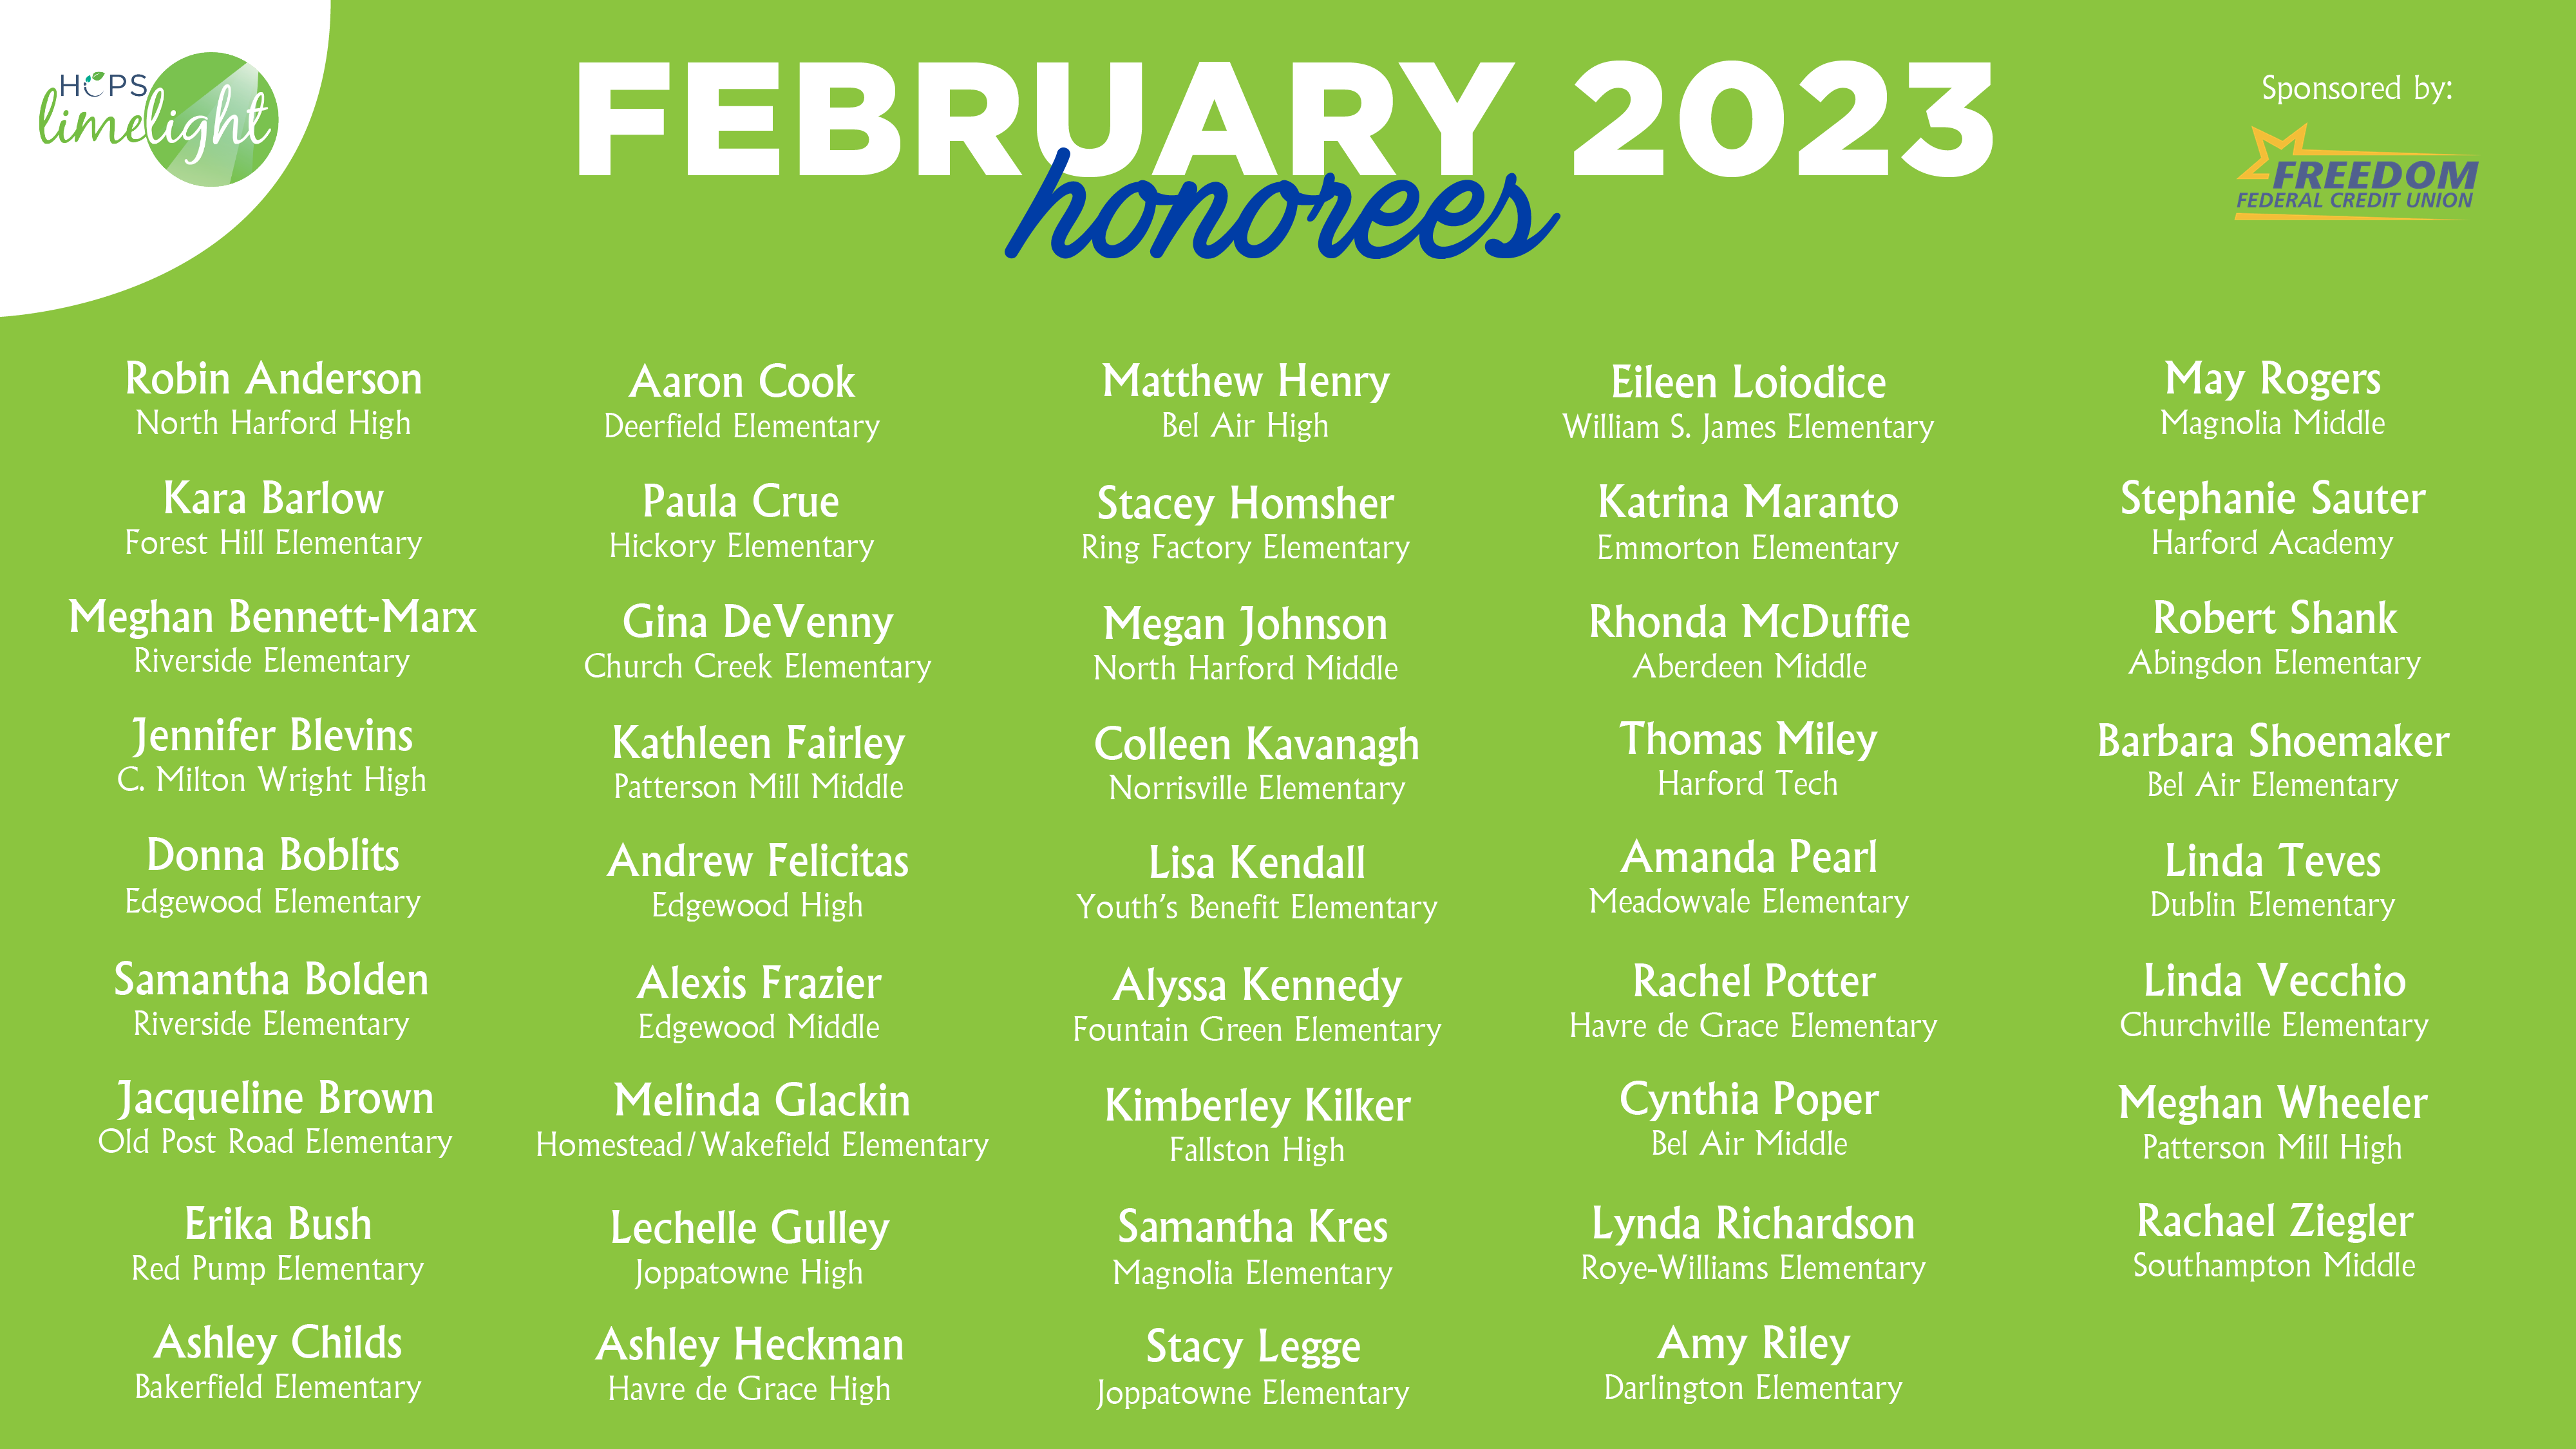 HCPS Limelight Honorees - February 2023